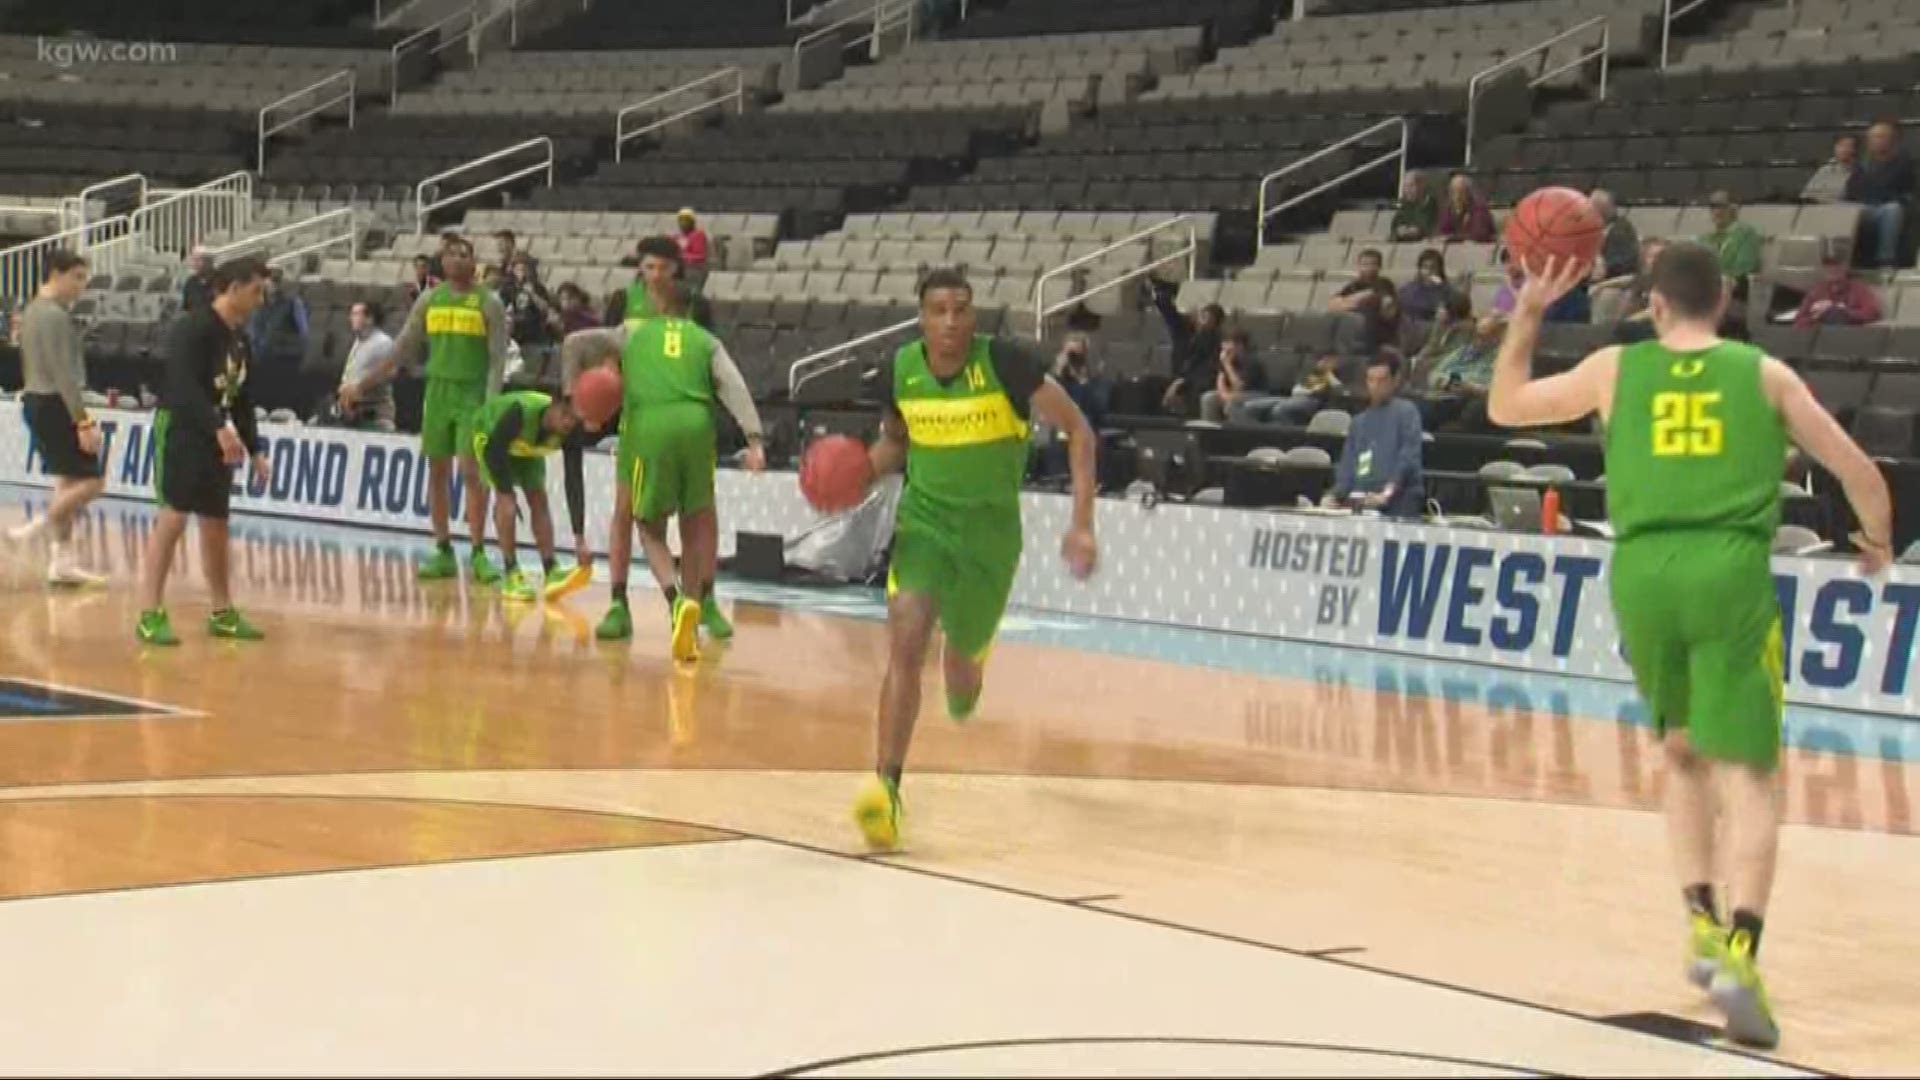 The Oregon Ducks are getting ready to open their NCAA Tournament against Wisconsin.